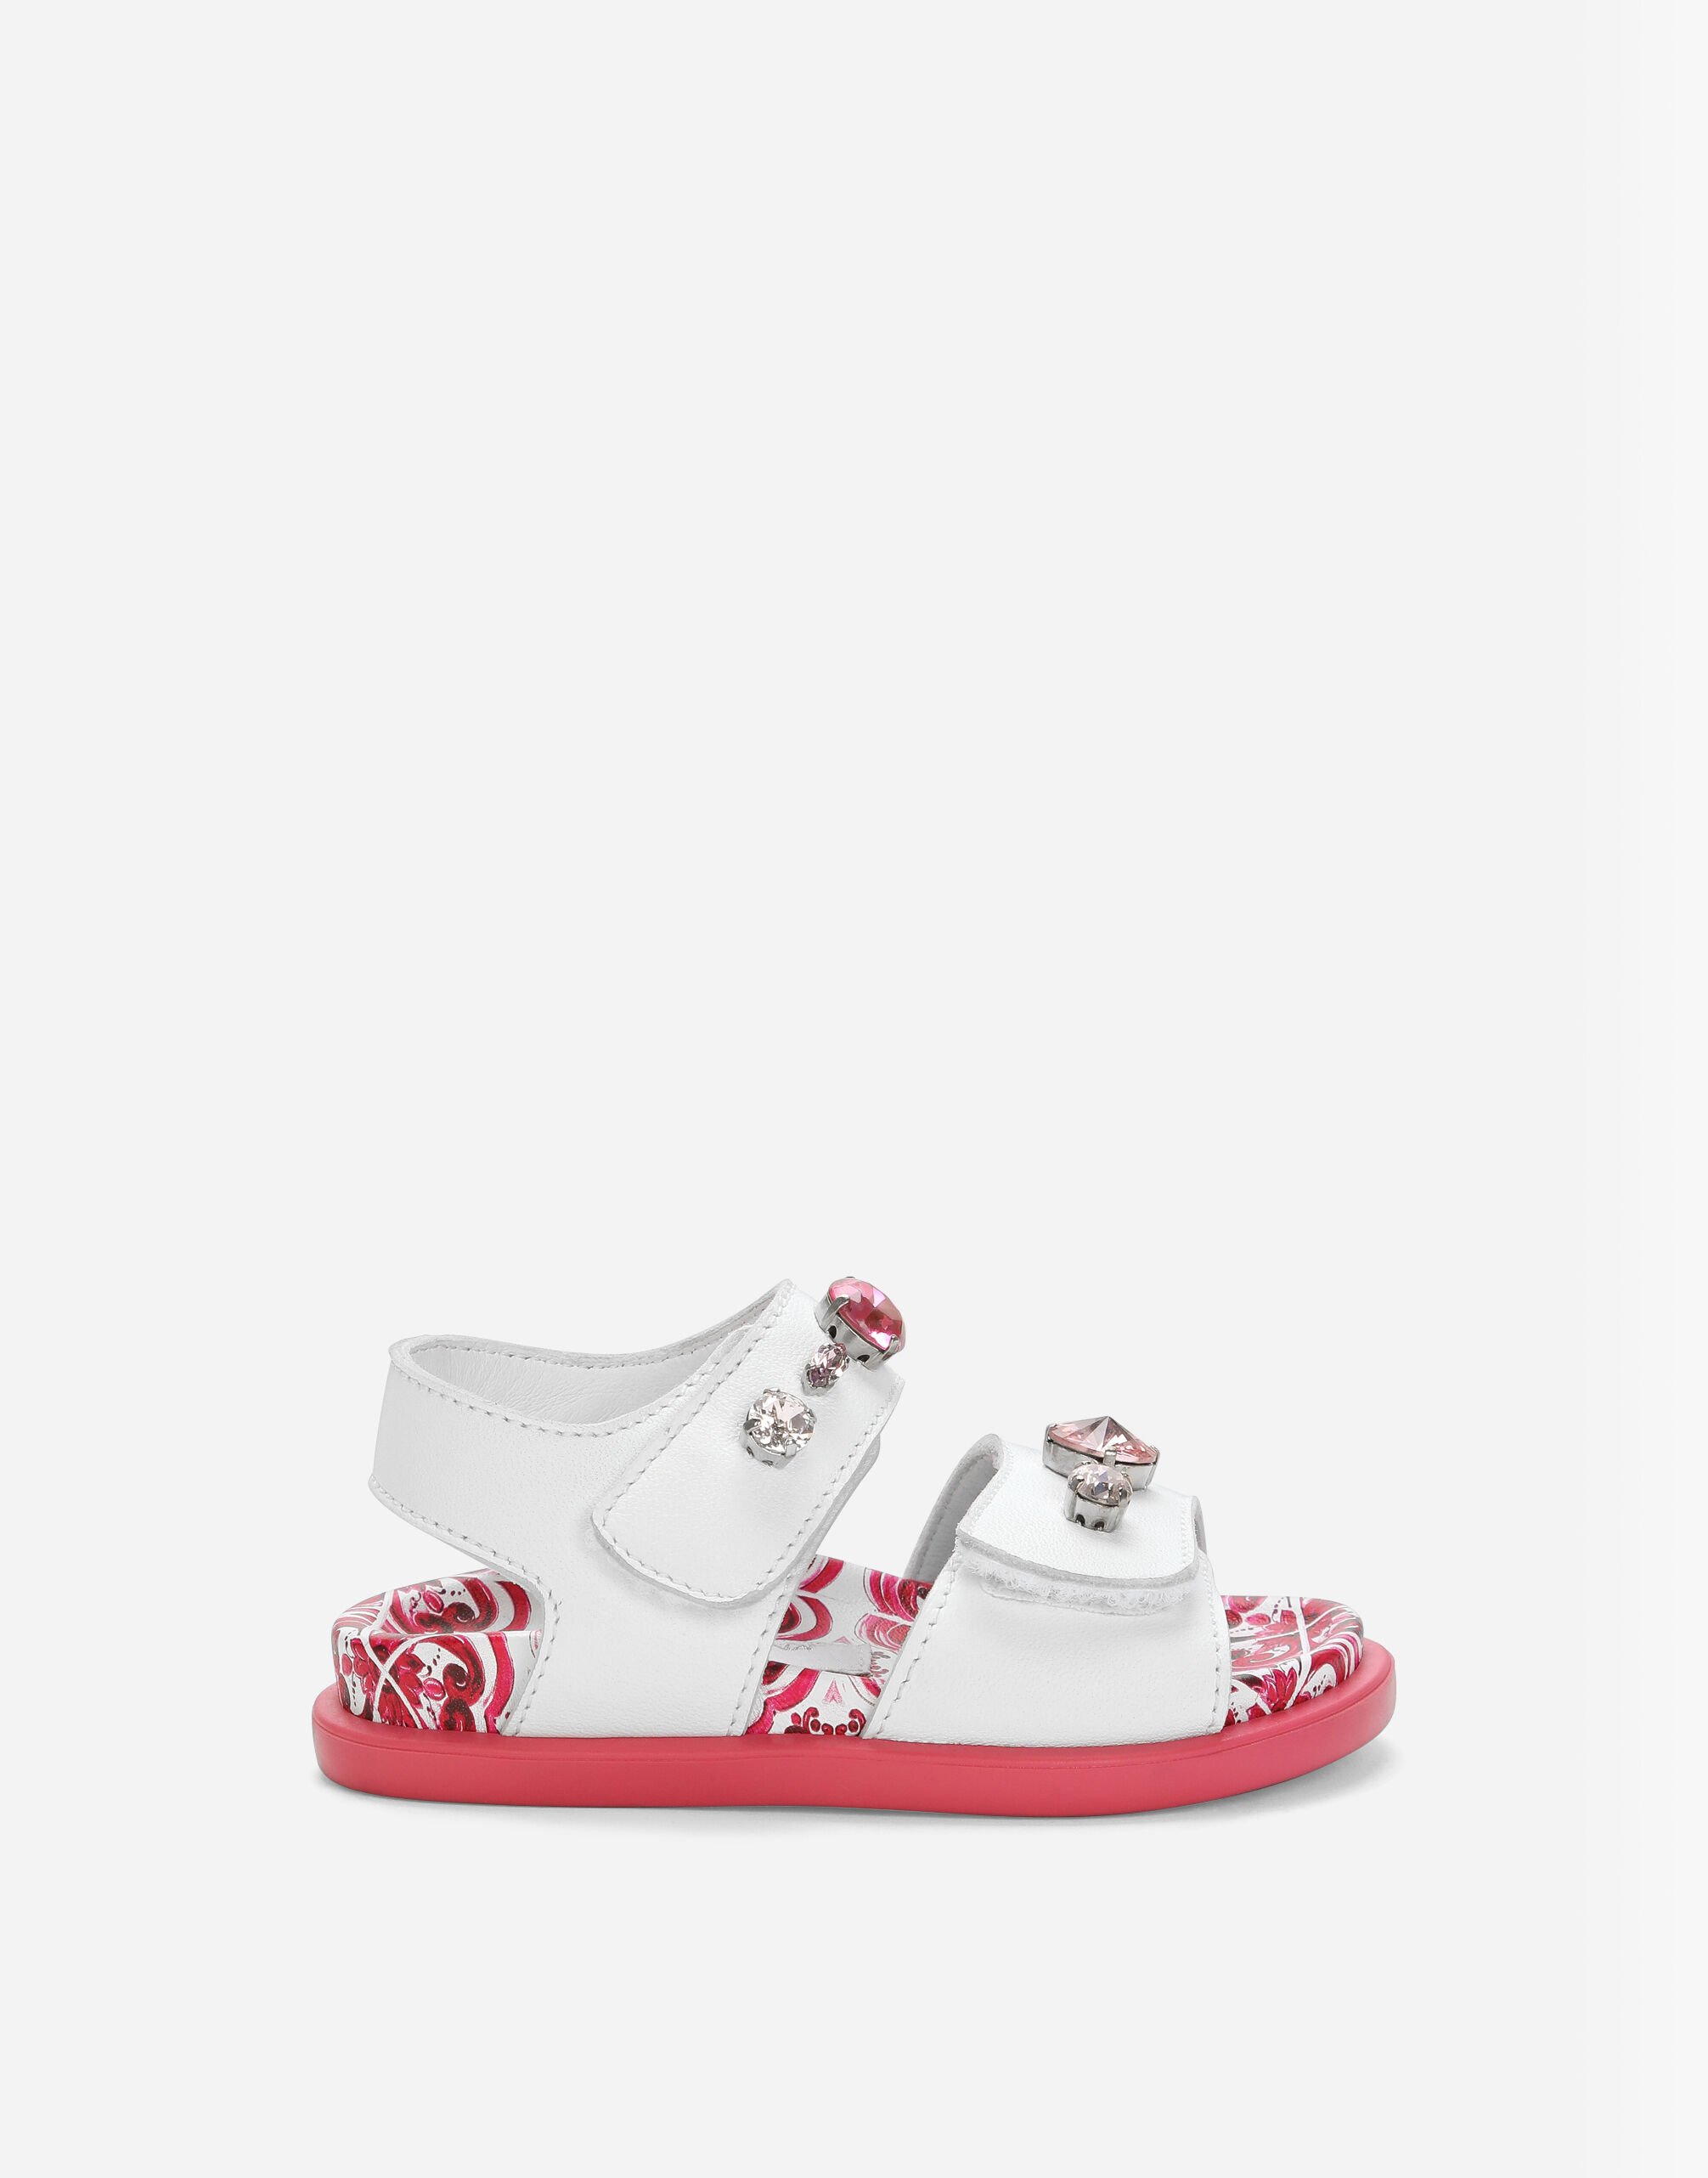 Dolce & Gabbana Patent leather sandals with embellishment Print D10819AQ081